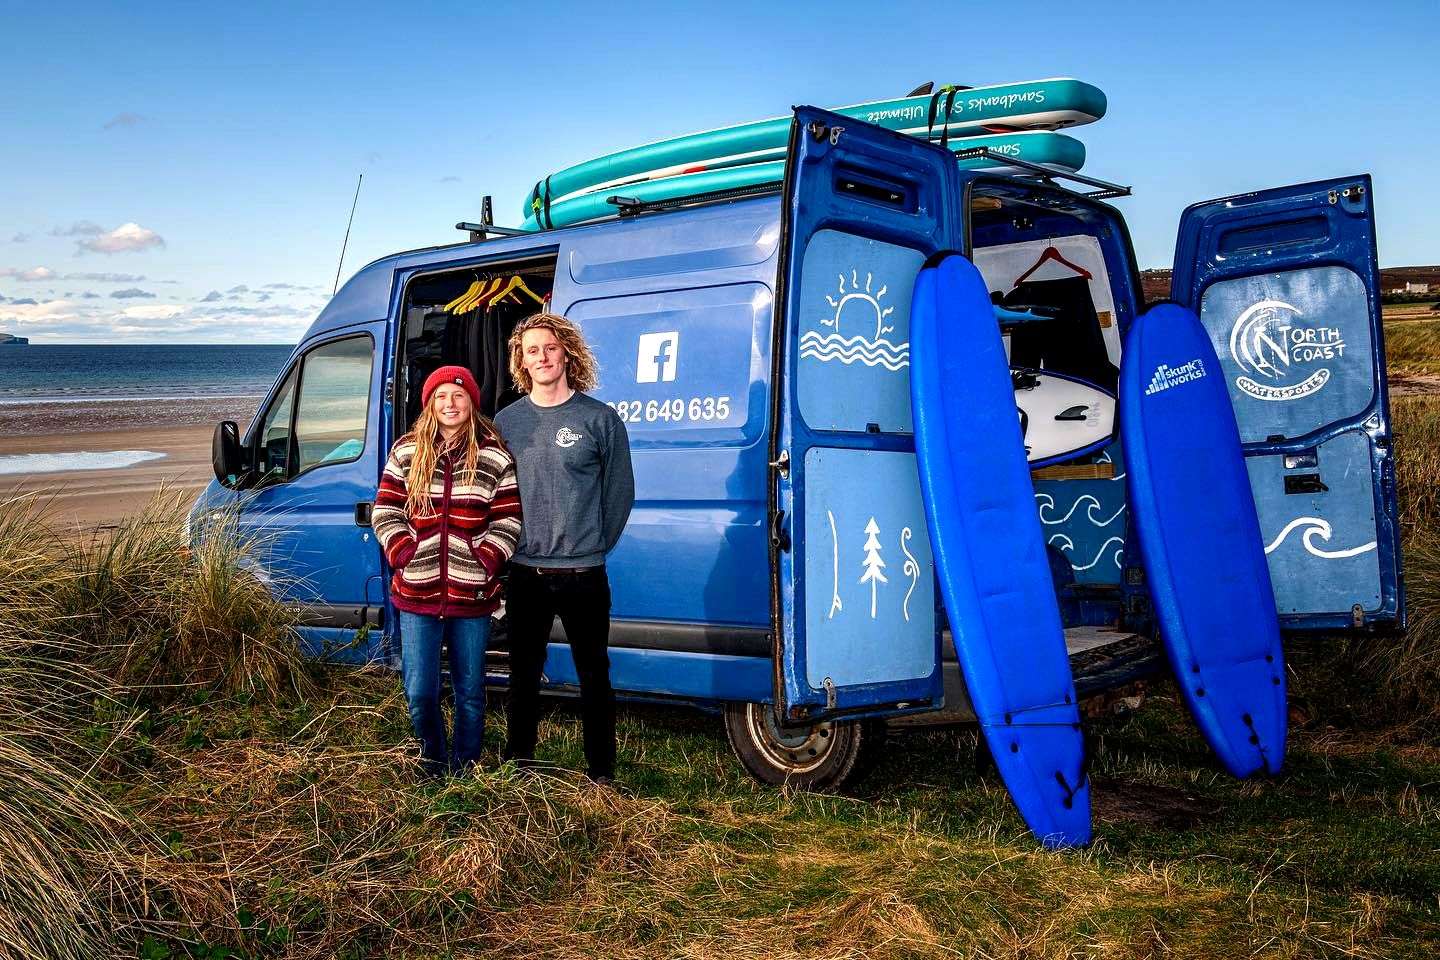 North Coast Watersports were recognised in the young entrepreneur category in 2019.